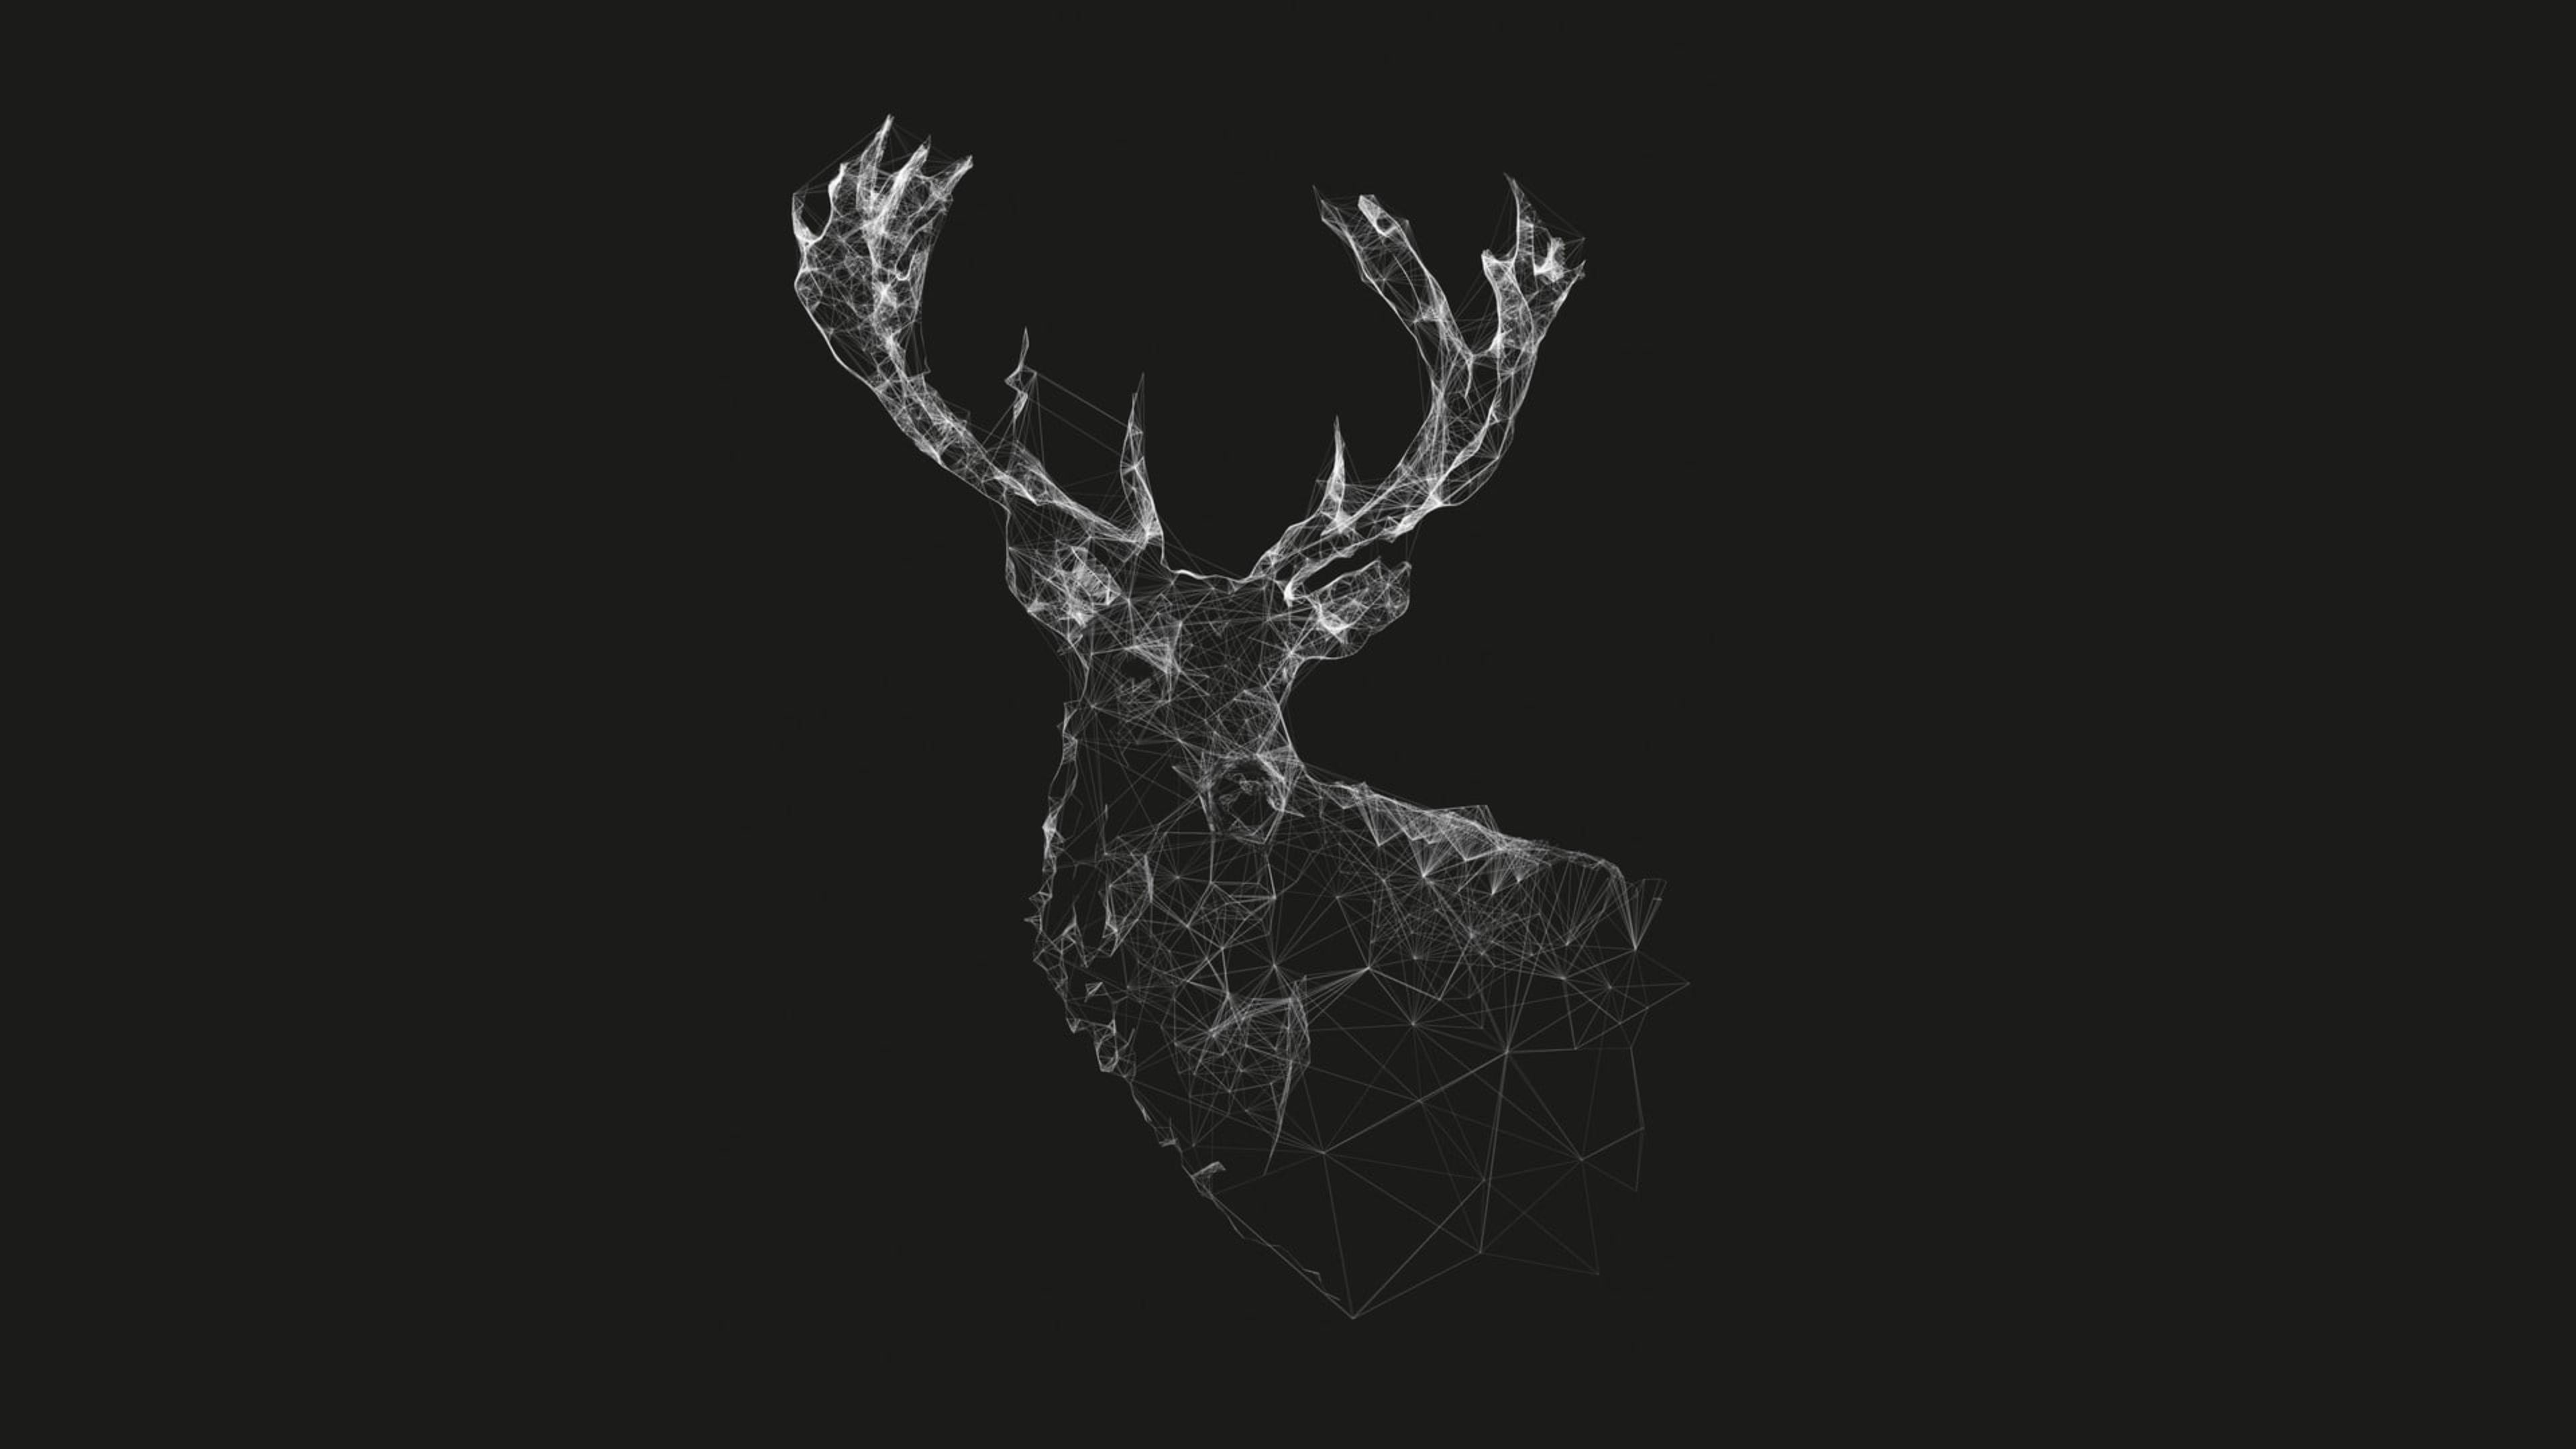 A digitally rendered image of a deer head made up of lines and dots - Deer, profile picture